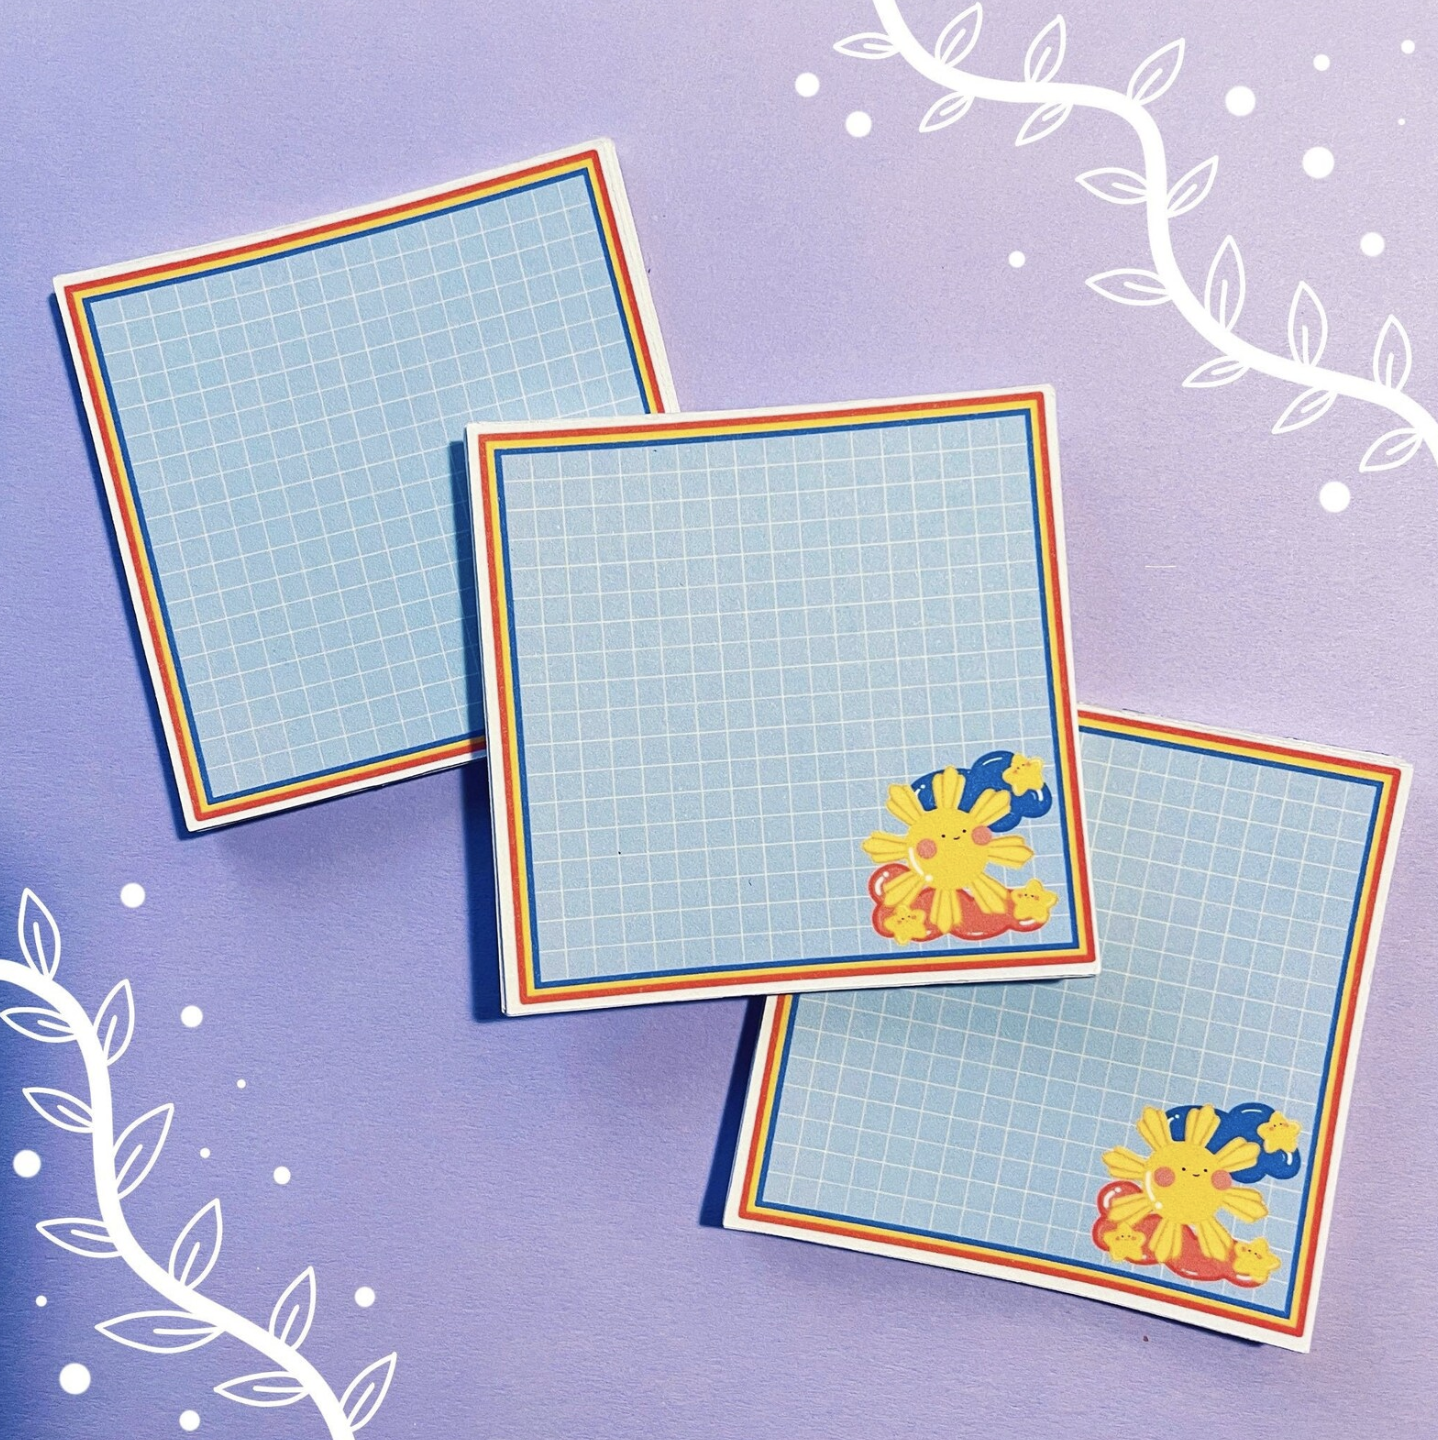 Sun and star characters on grid notepad displayed on a table.